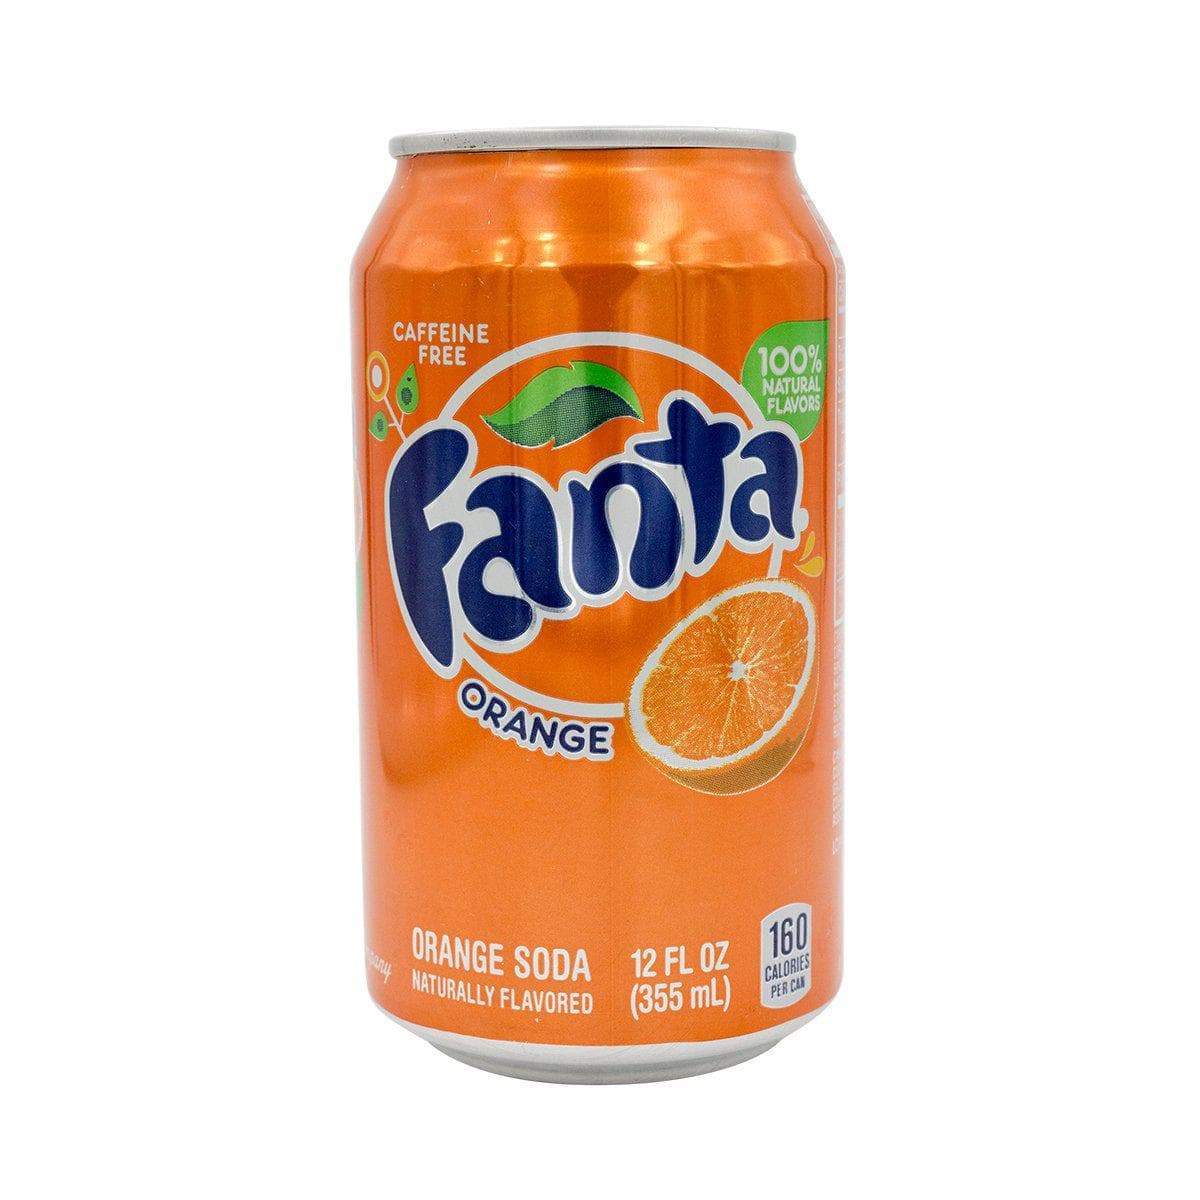 Discreet soda stash storage container with realistic shape design of real fanta can